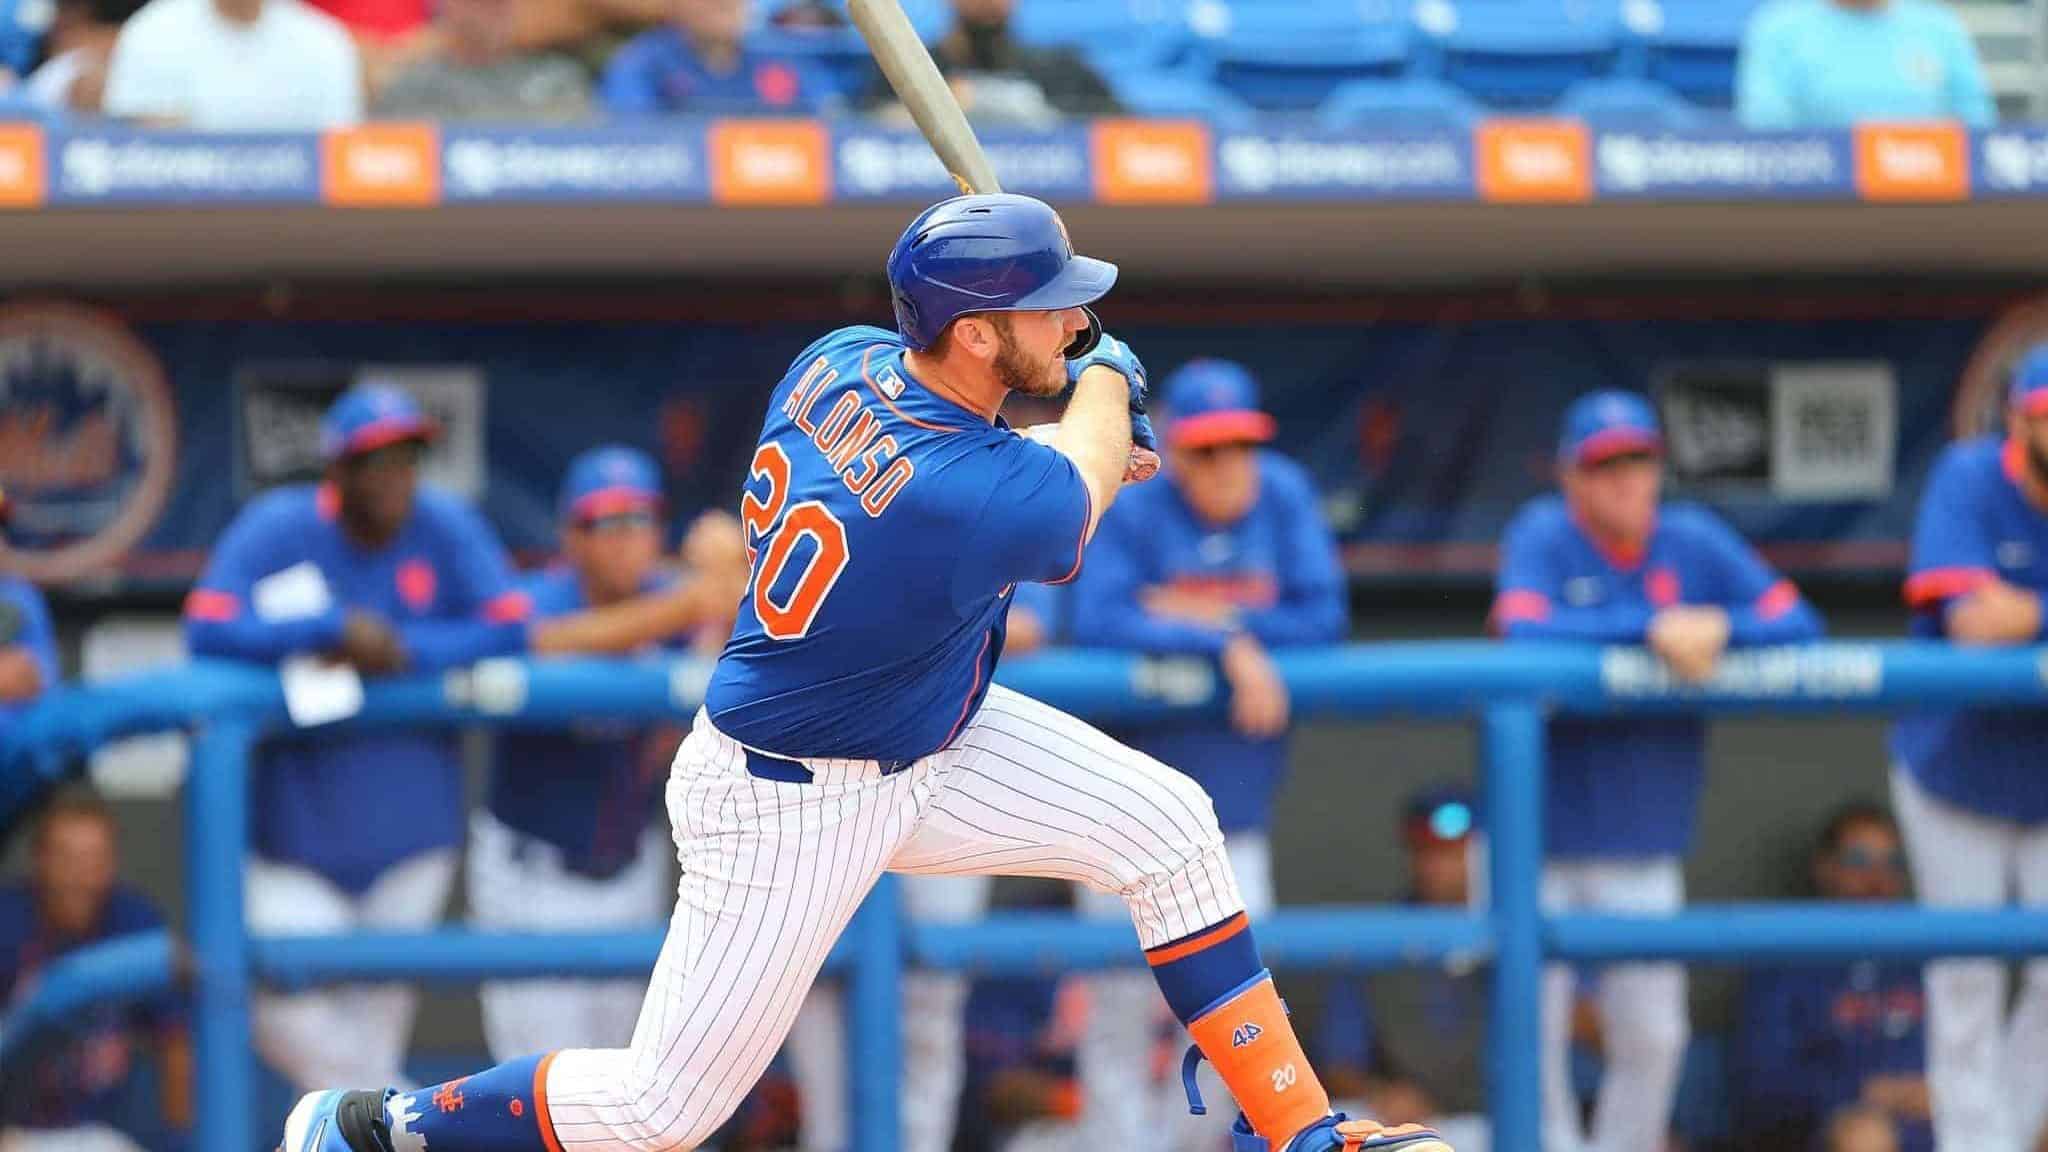 PORT ST. LUCIE, FL - MARCH 08: Pete Alonso #20 of the New York Mets hits an RBI double against the Houston Astros during the fifth inning of a spring training baseball game at Clover Park on March 8, 2020 in Port St. Lucie, Florida. The Mets defeated the Astros 3-1.